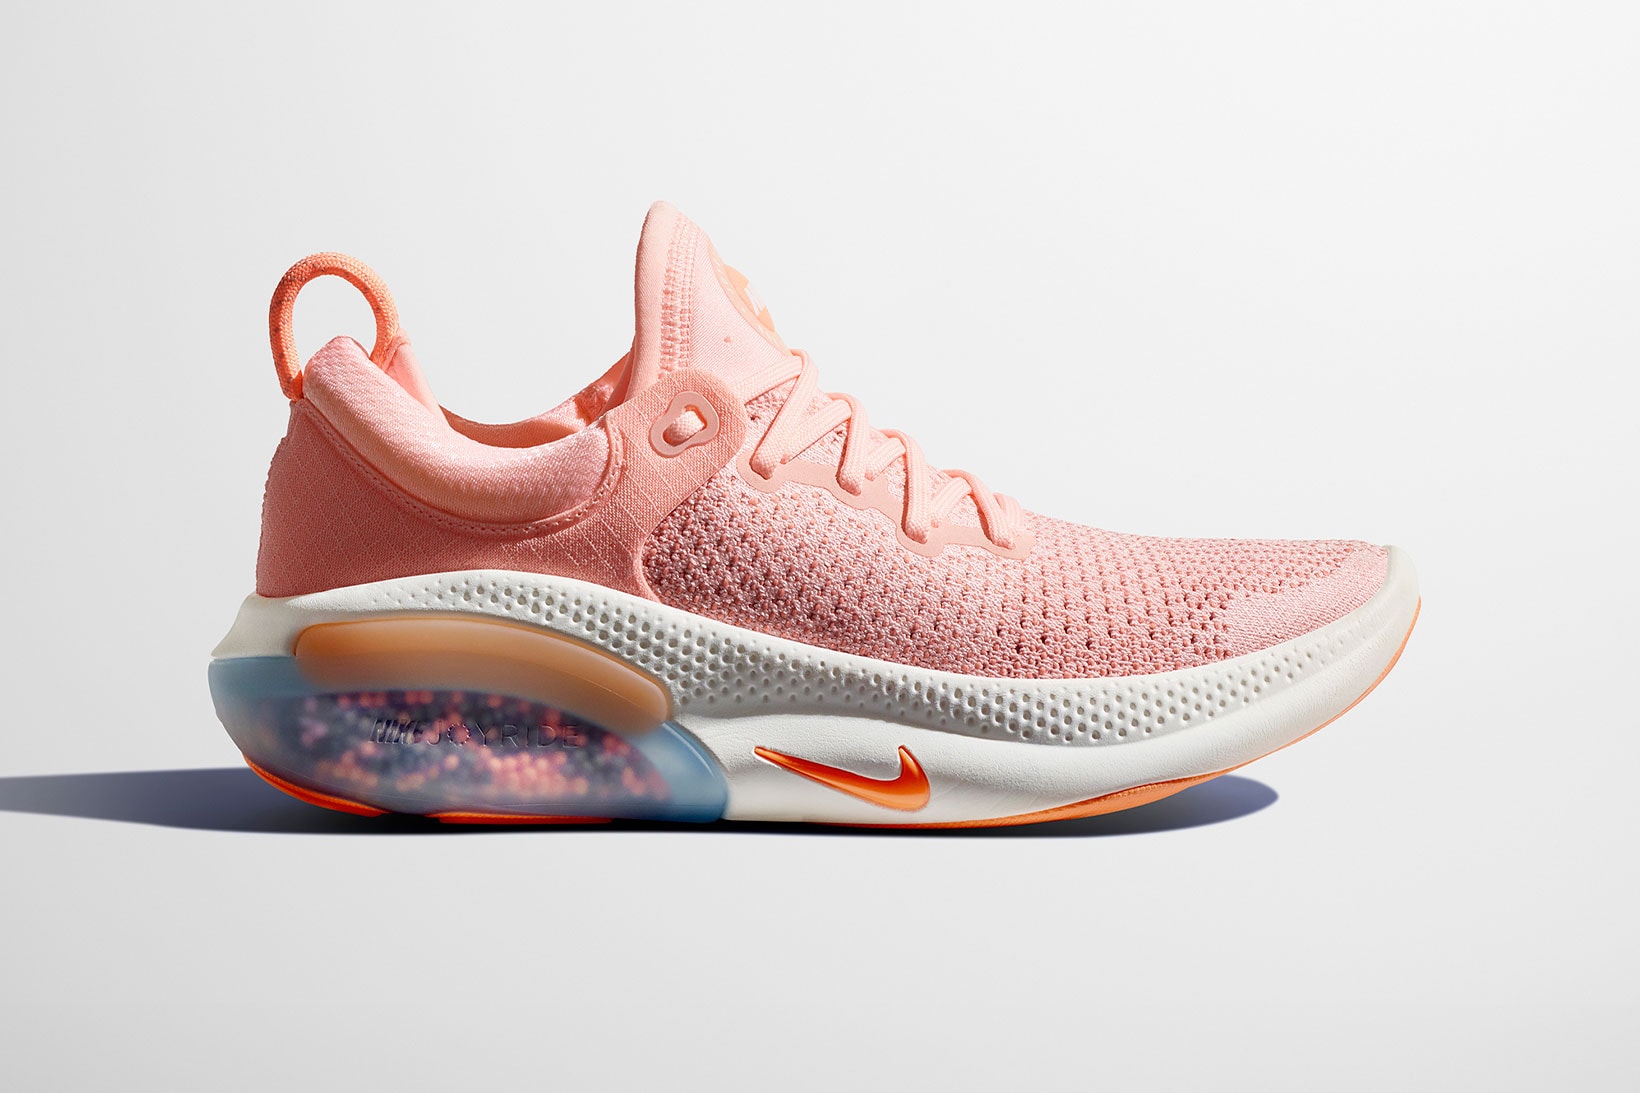 nike joyride cushioning system tpe beads air react flyknit sneakers release date 